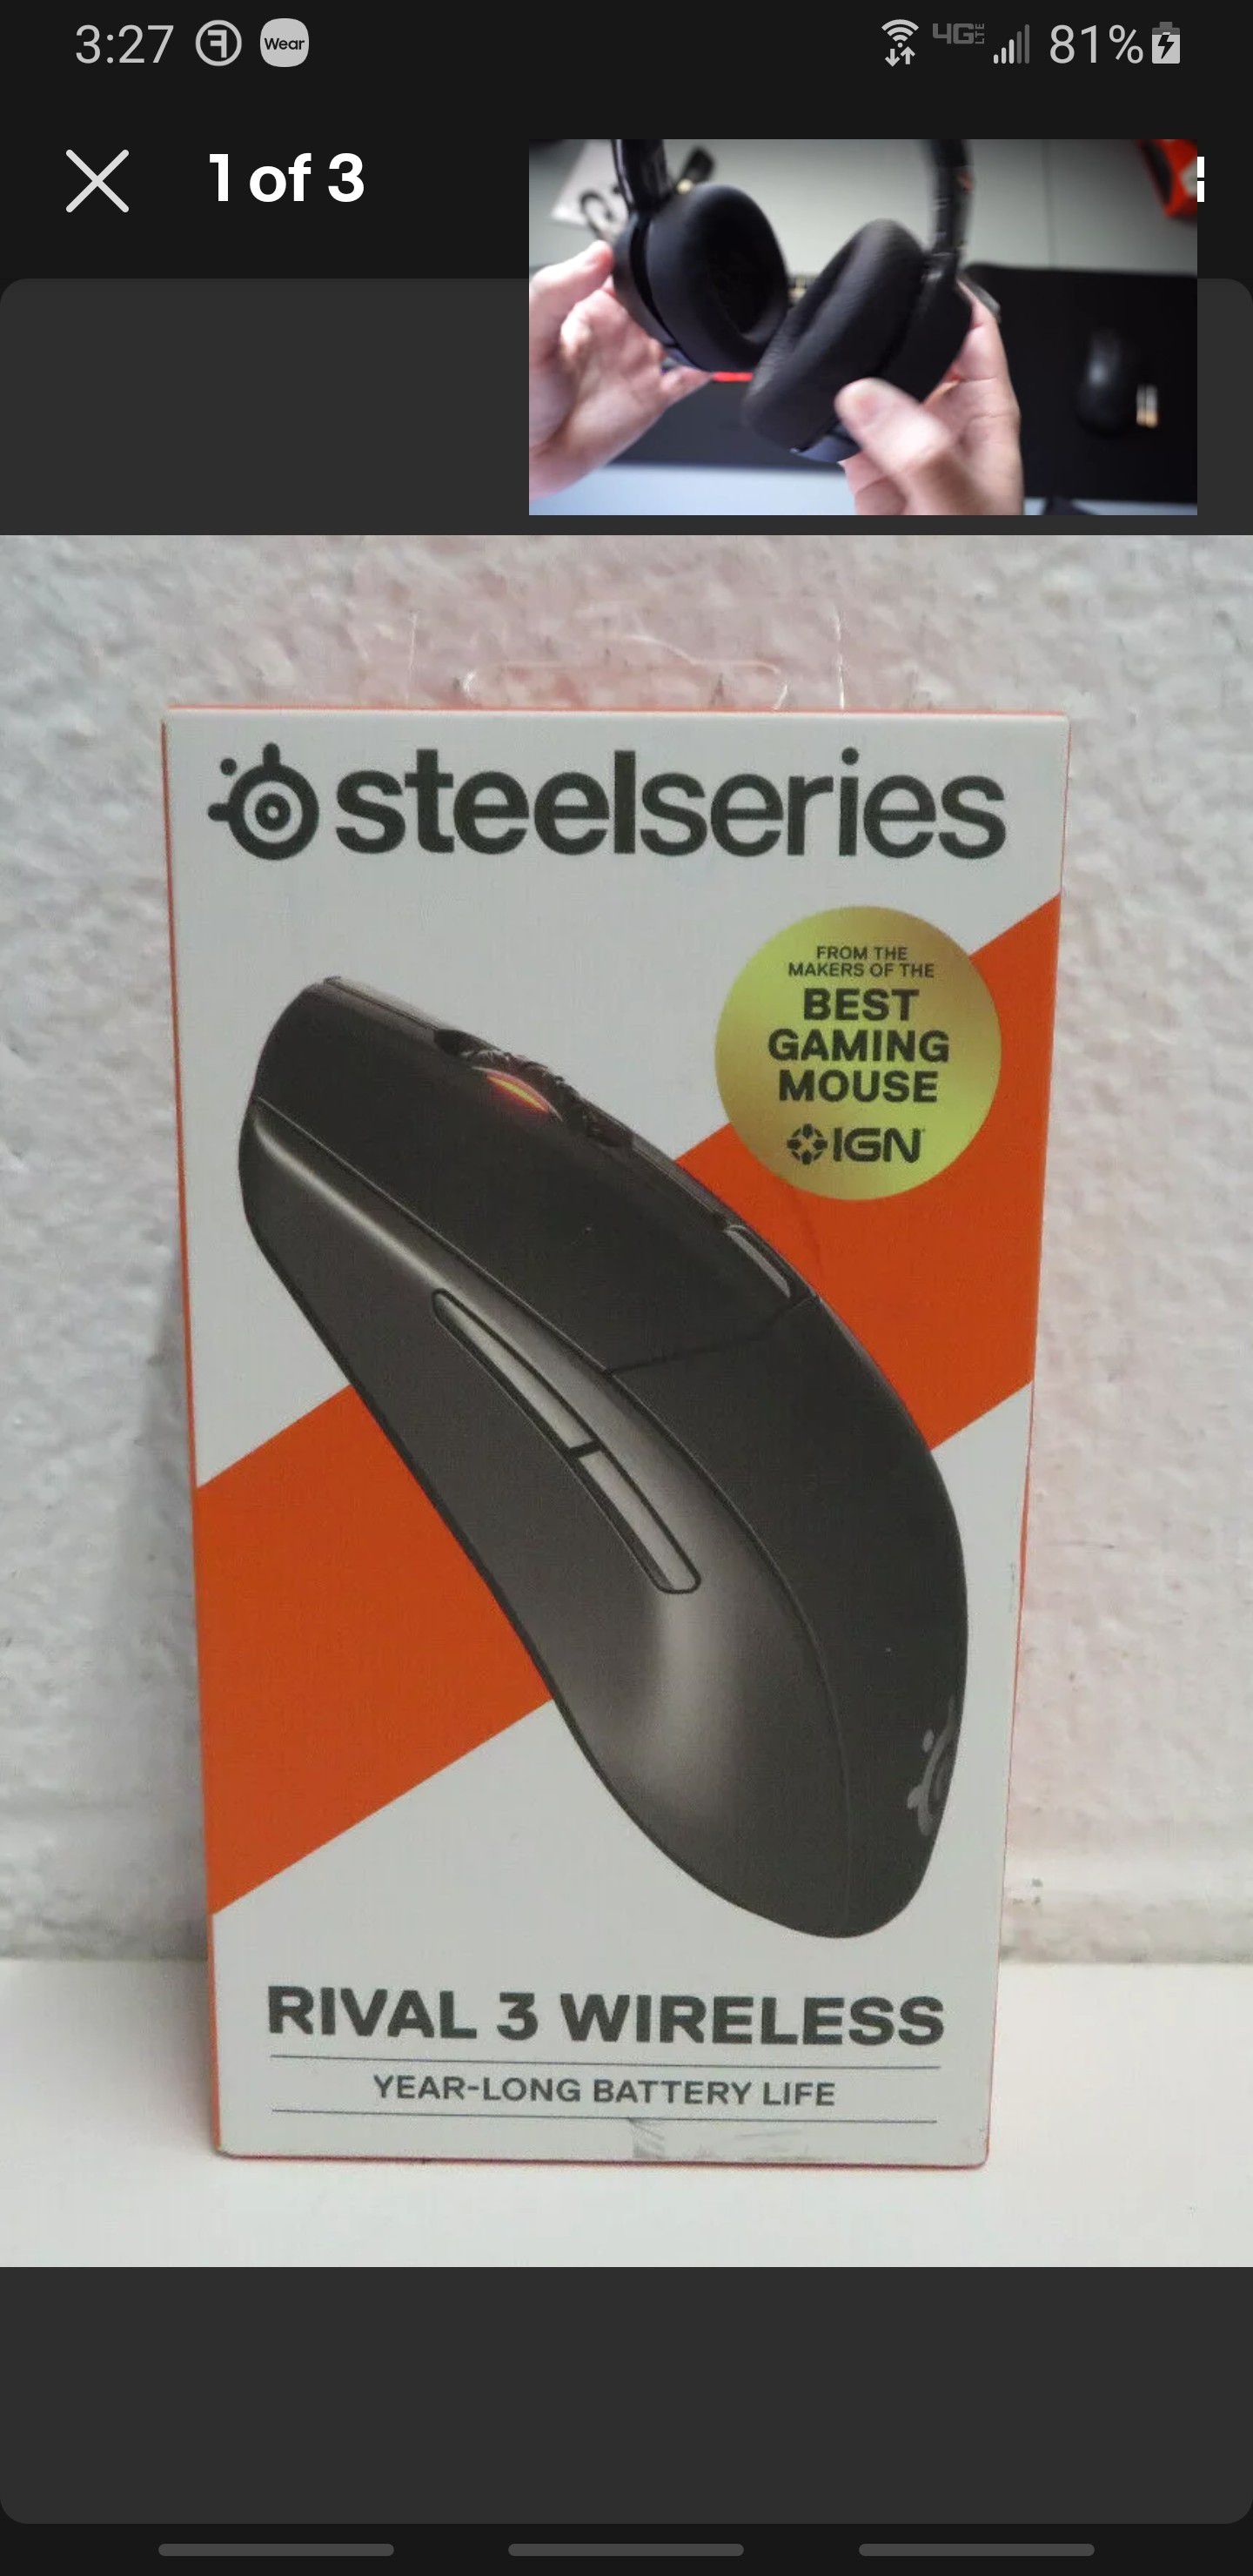 Steelseries Rival 3 Wireless mouse